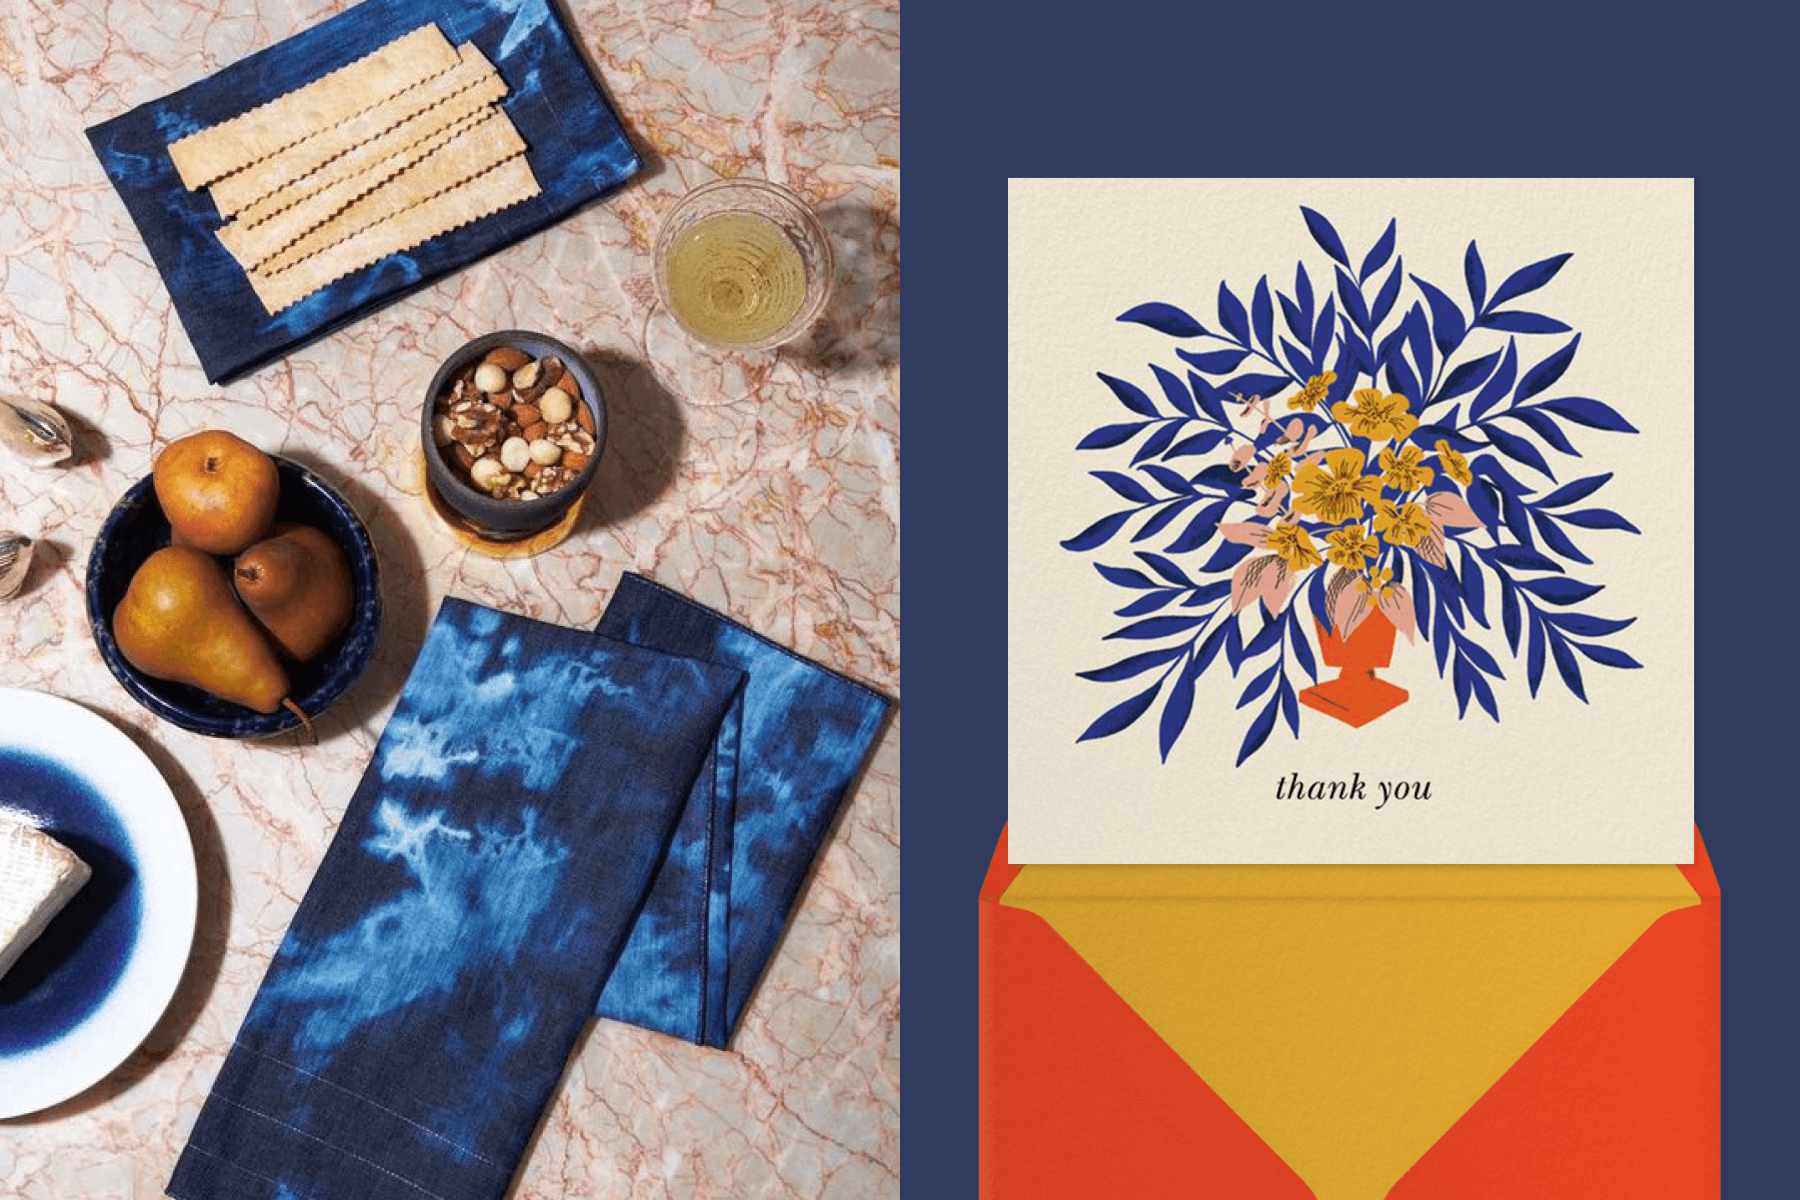 Left: Indigo tie-dye napkins on a marble table surrounded by a bowl of pears, a bowl of nuts, and a glass of Champagne; right: a cream thank you card with an illustration of a vase of flowers, paired with an orange envelope.